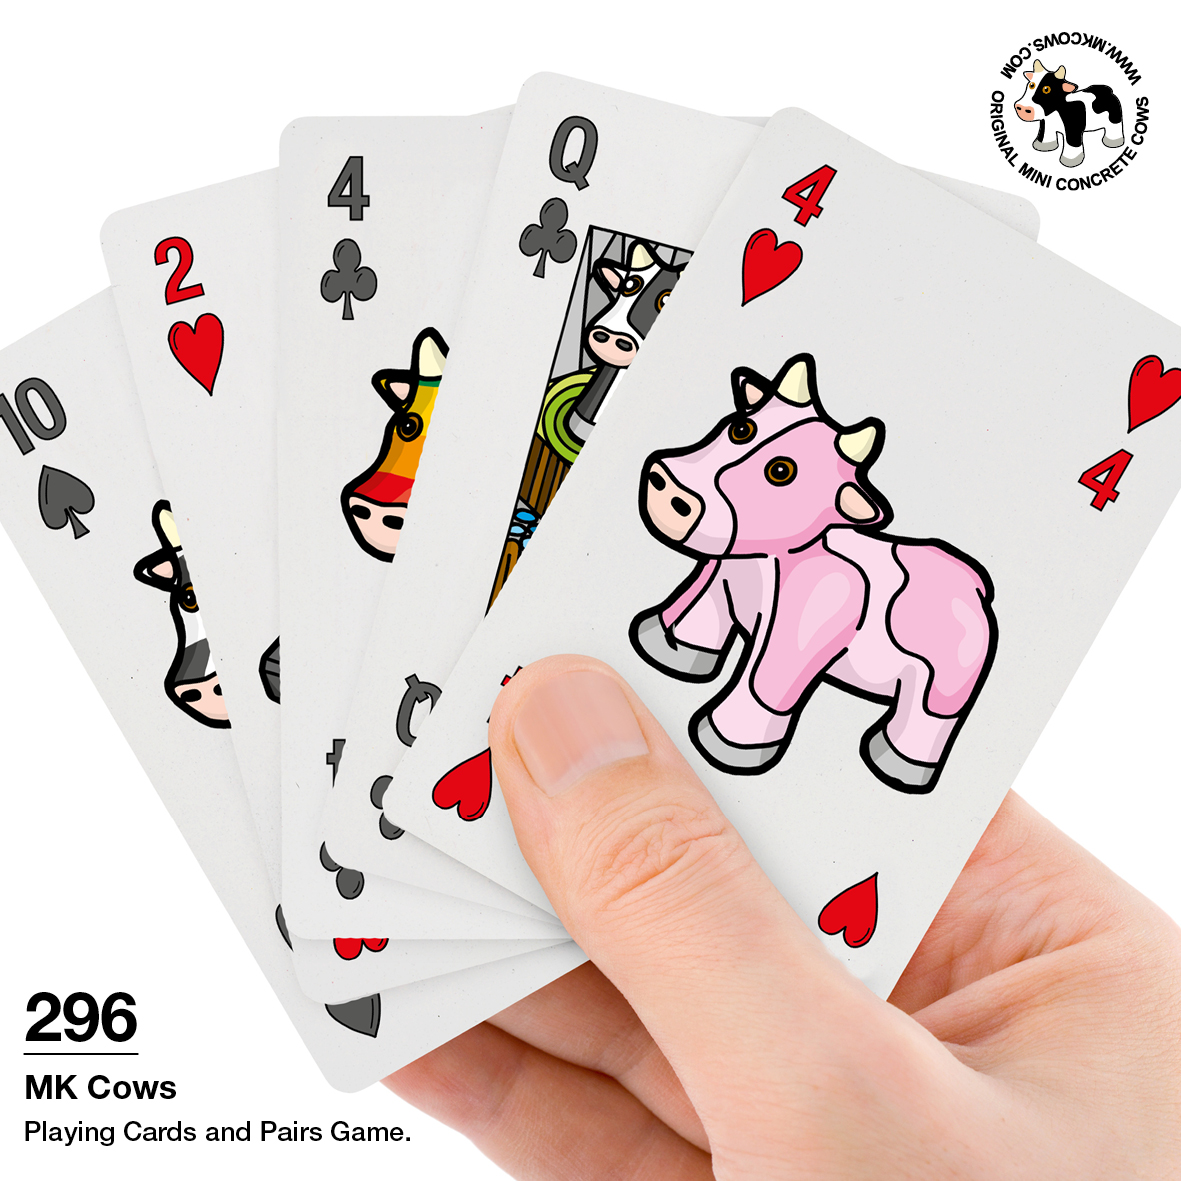 MK Cows Playing Cards & Pairs Game